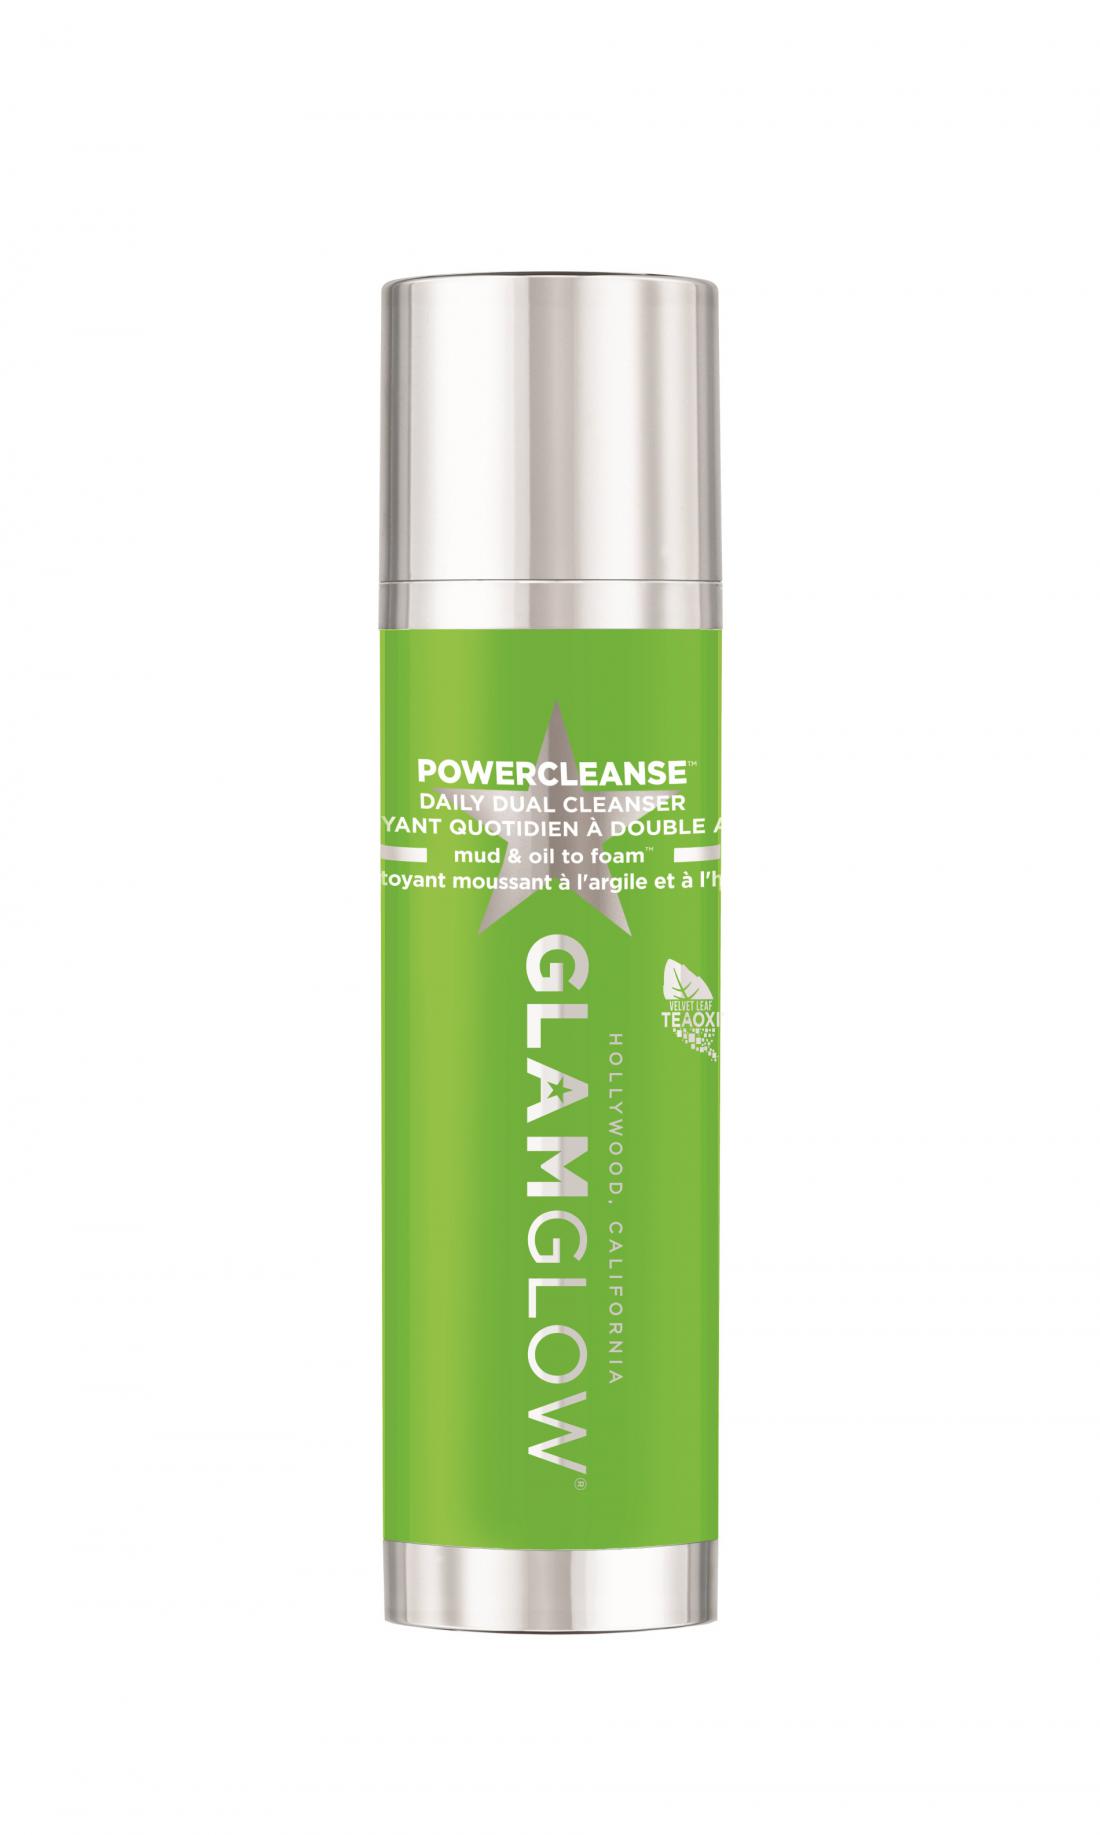 GlamGlow; PowerCleanse Daily Dual Cleanser